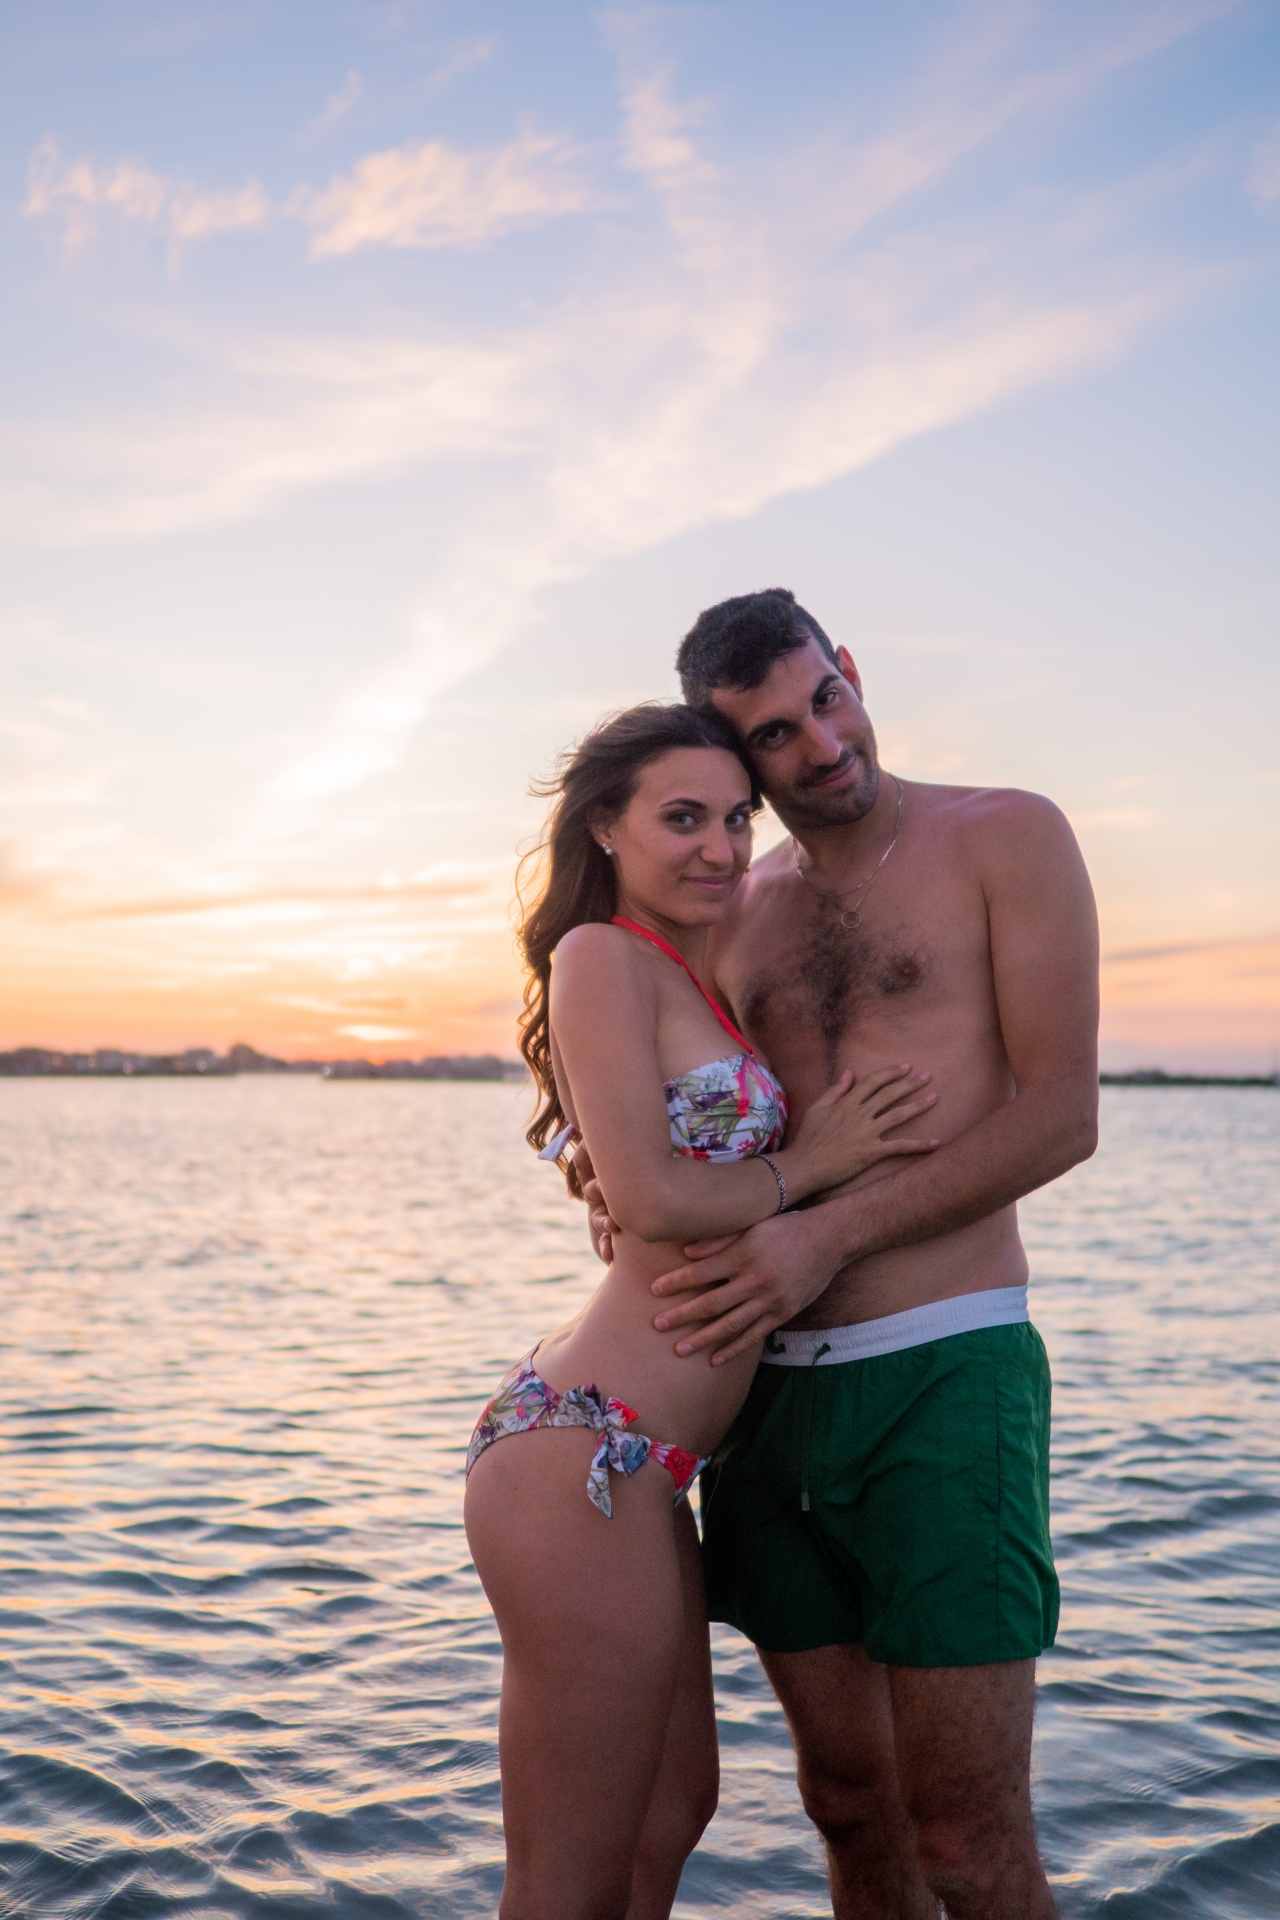 ﻿Engagement pre-wedding photoshoot in the port of Rimini 